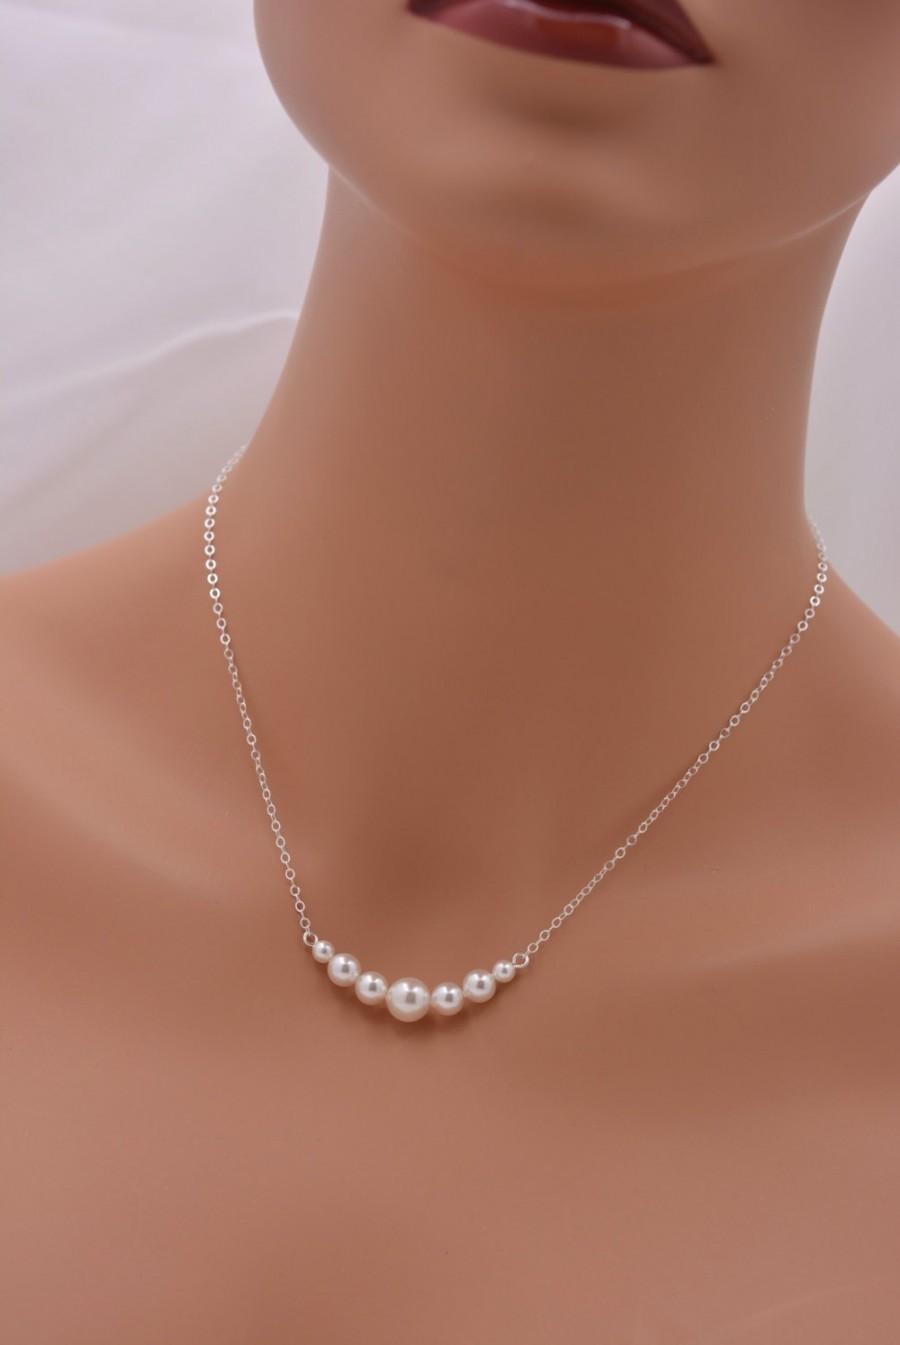 Свадьба - Set of 6 Pearl Necklaces, 6 Bridesmaid Pearl Necklaces, 925 Sterling Silver Necklaces, Pearl Bar Necklace, Floating Pearls 0305